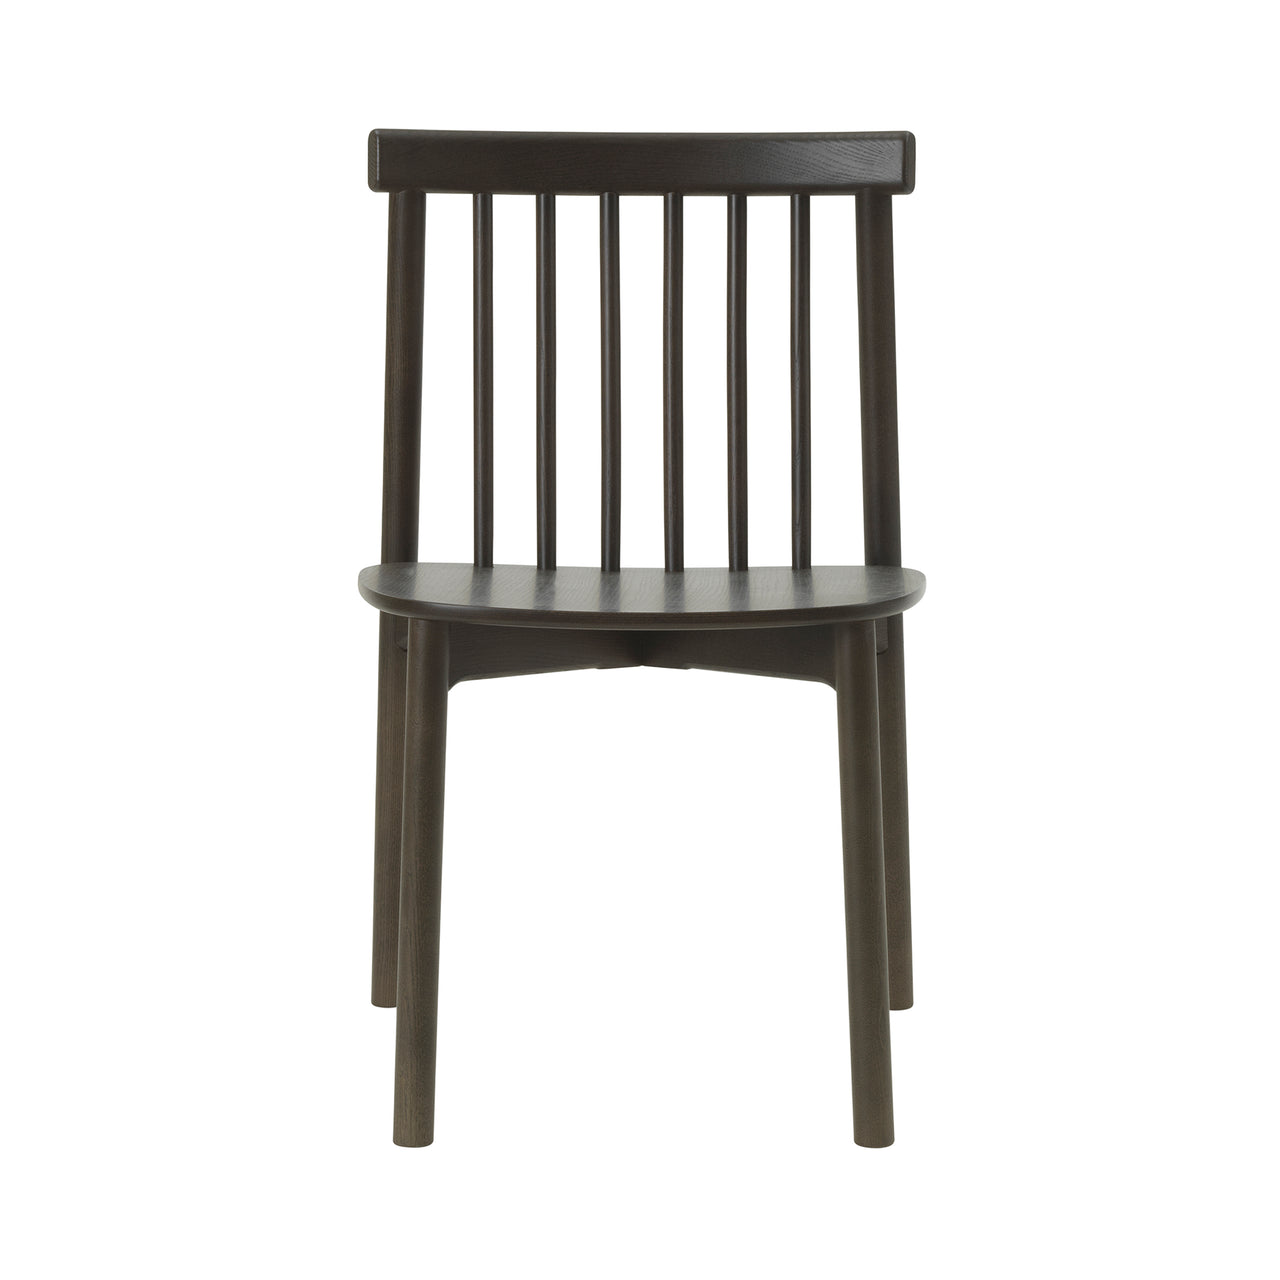 Pind Chair: Without Arm + Brown Stained Ash